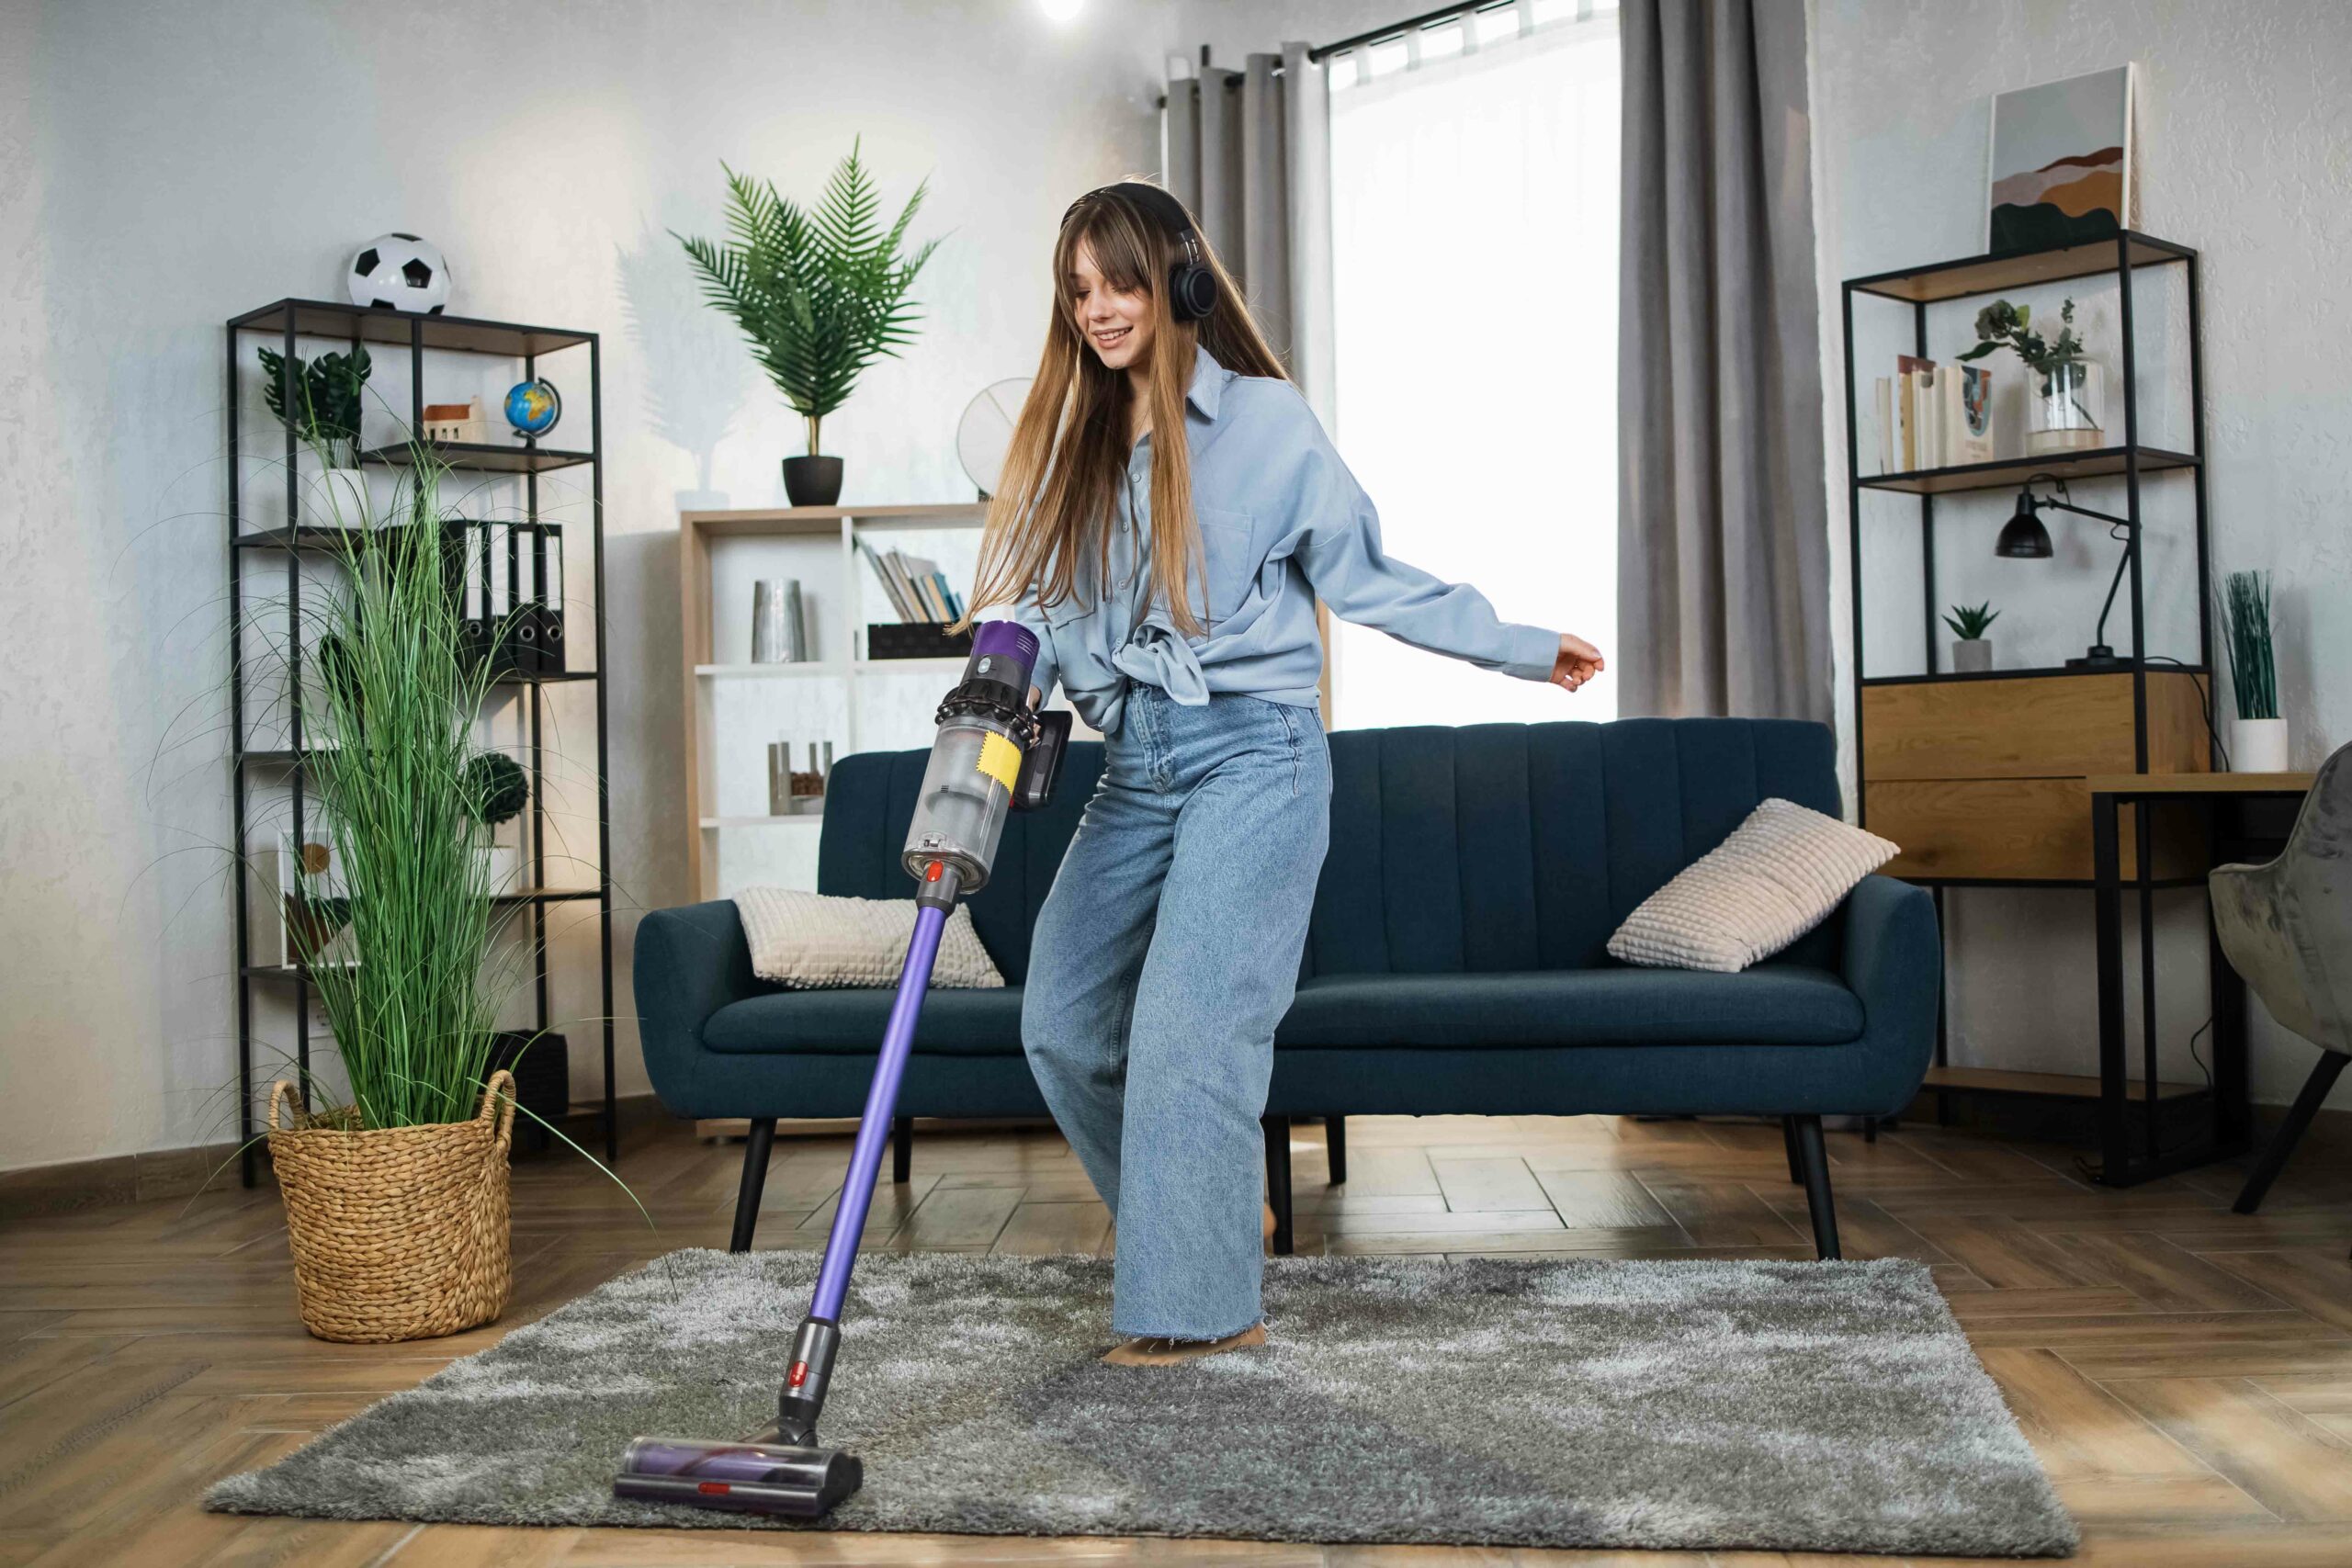 Global vacuum cleaner market to grow by CAGR of 9.6 until 2028